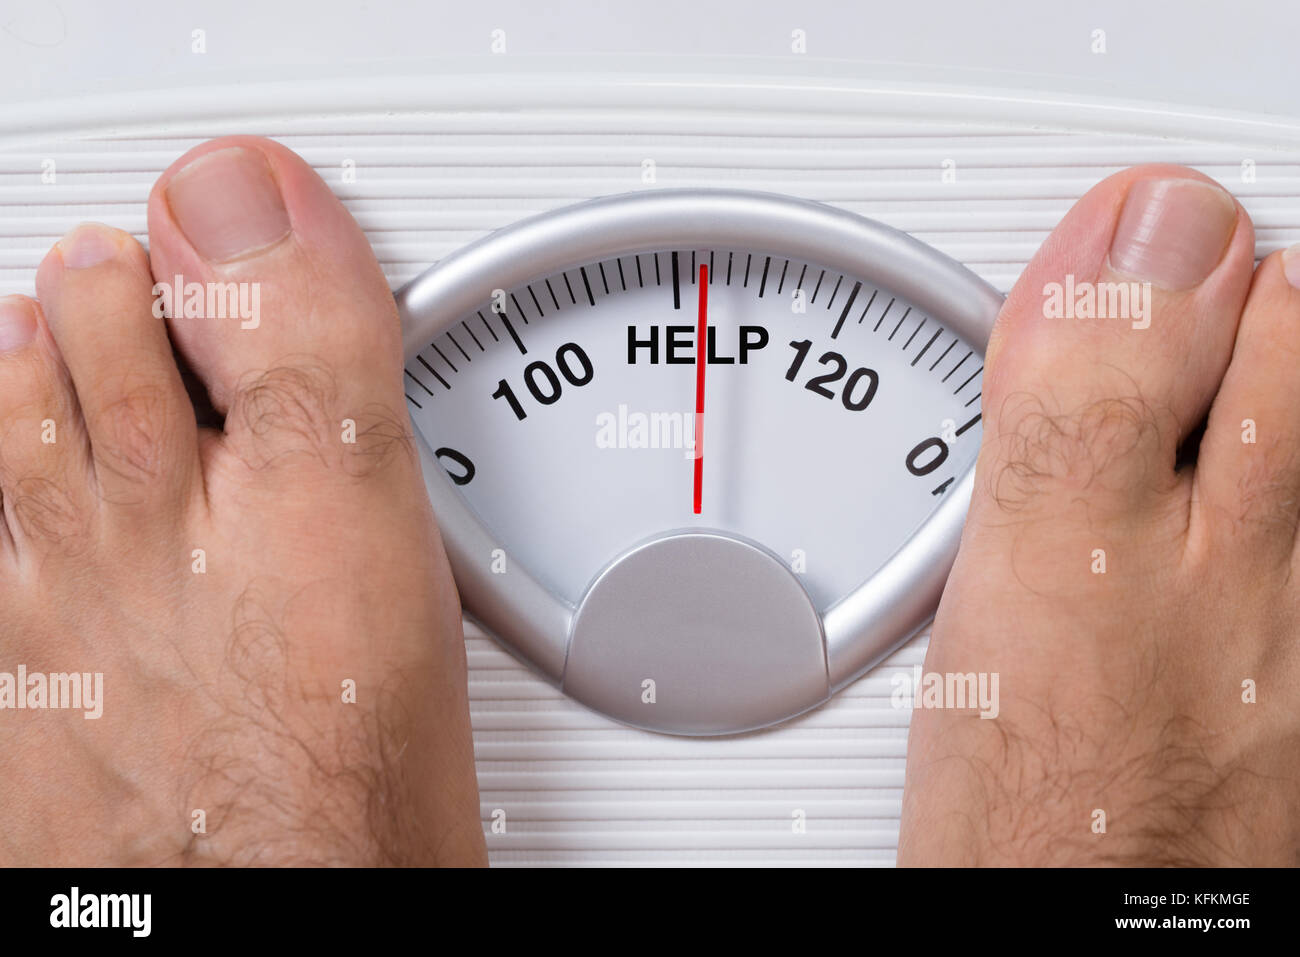 Closeup of man's feet on weight scale indicating Help Stock Photo